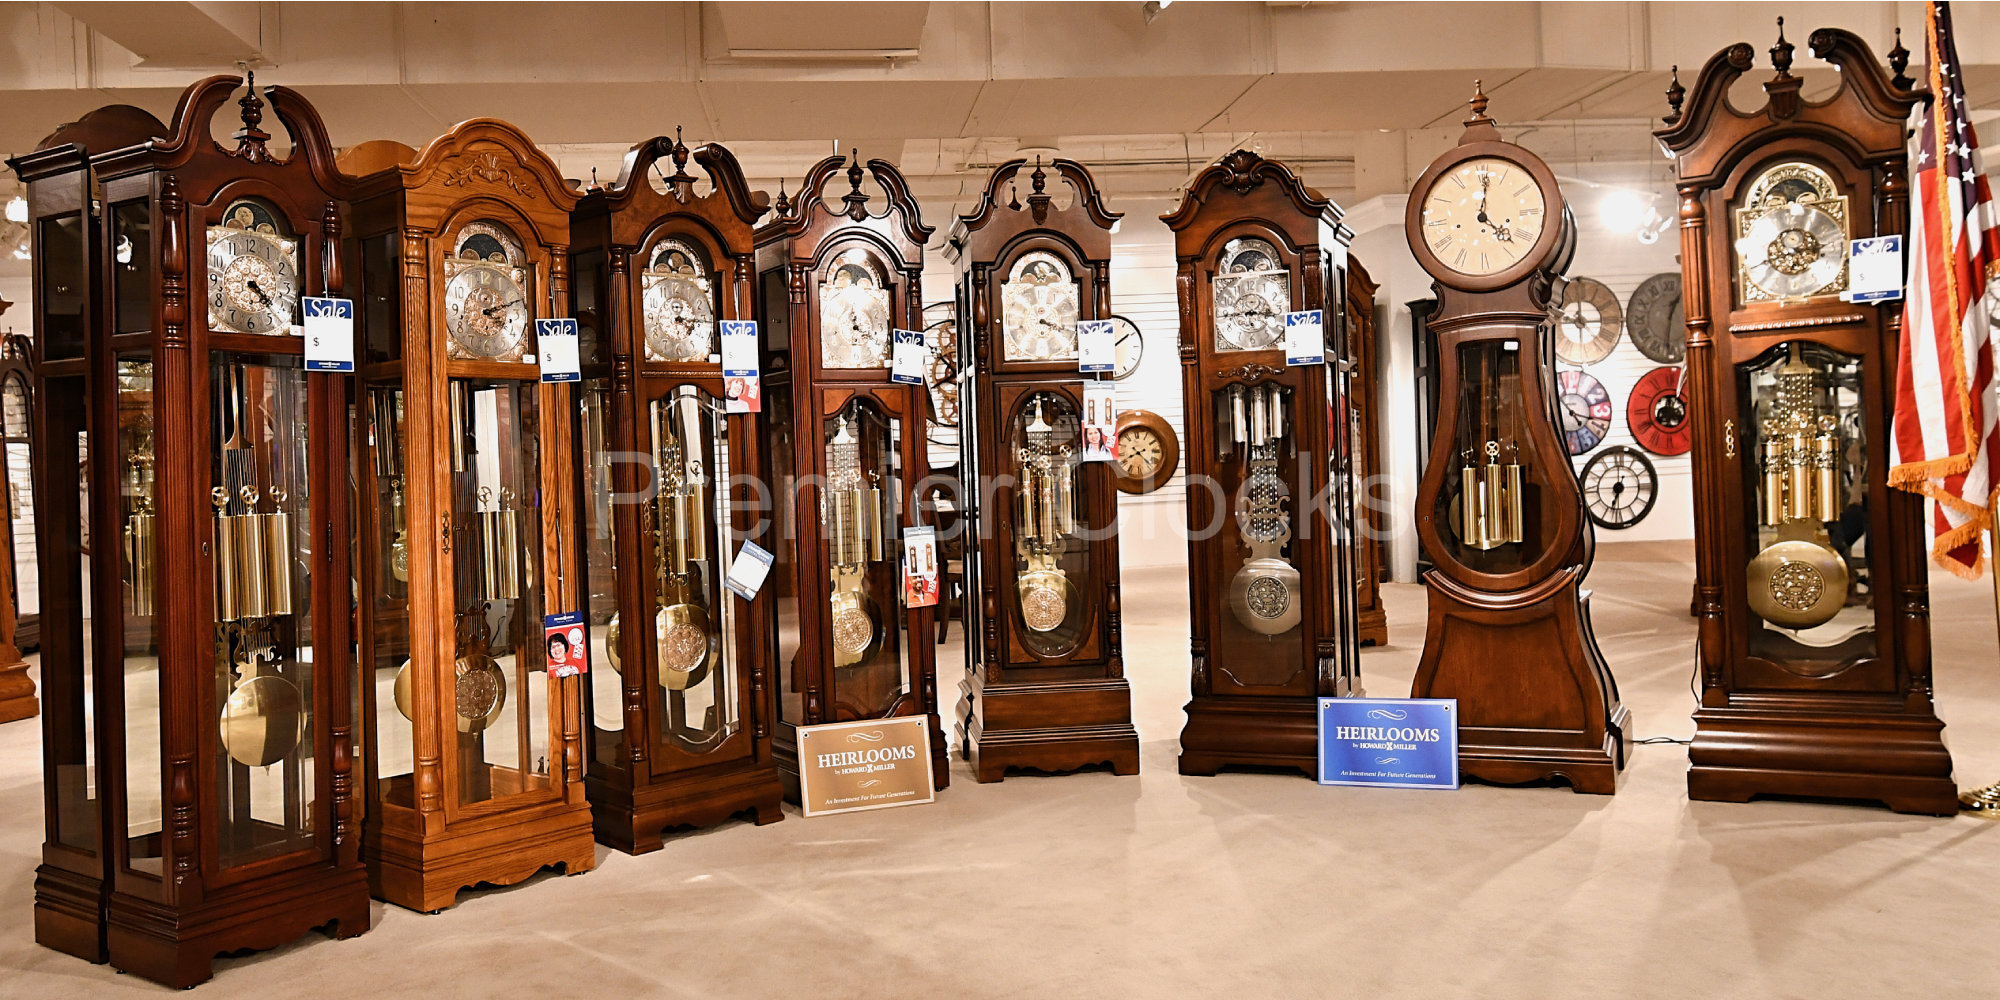 Grandfather Clock Crown Types - How to choose Howard Miller grandfather clocks - Premier Clocks